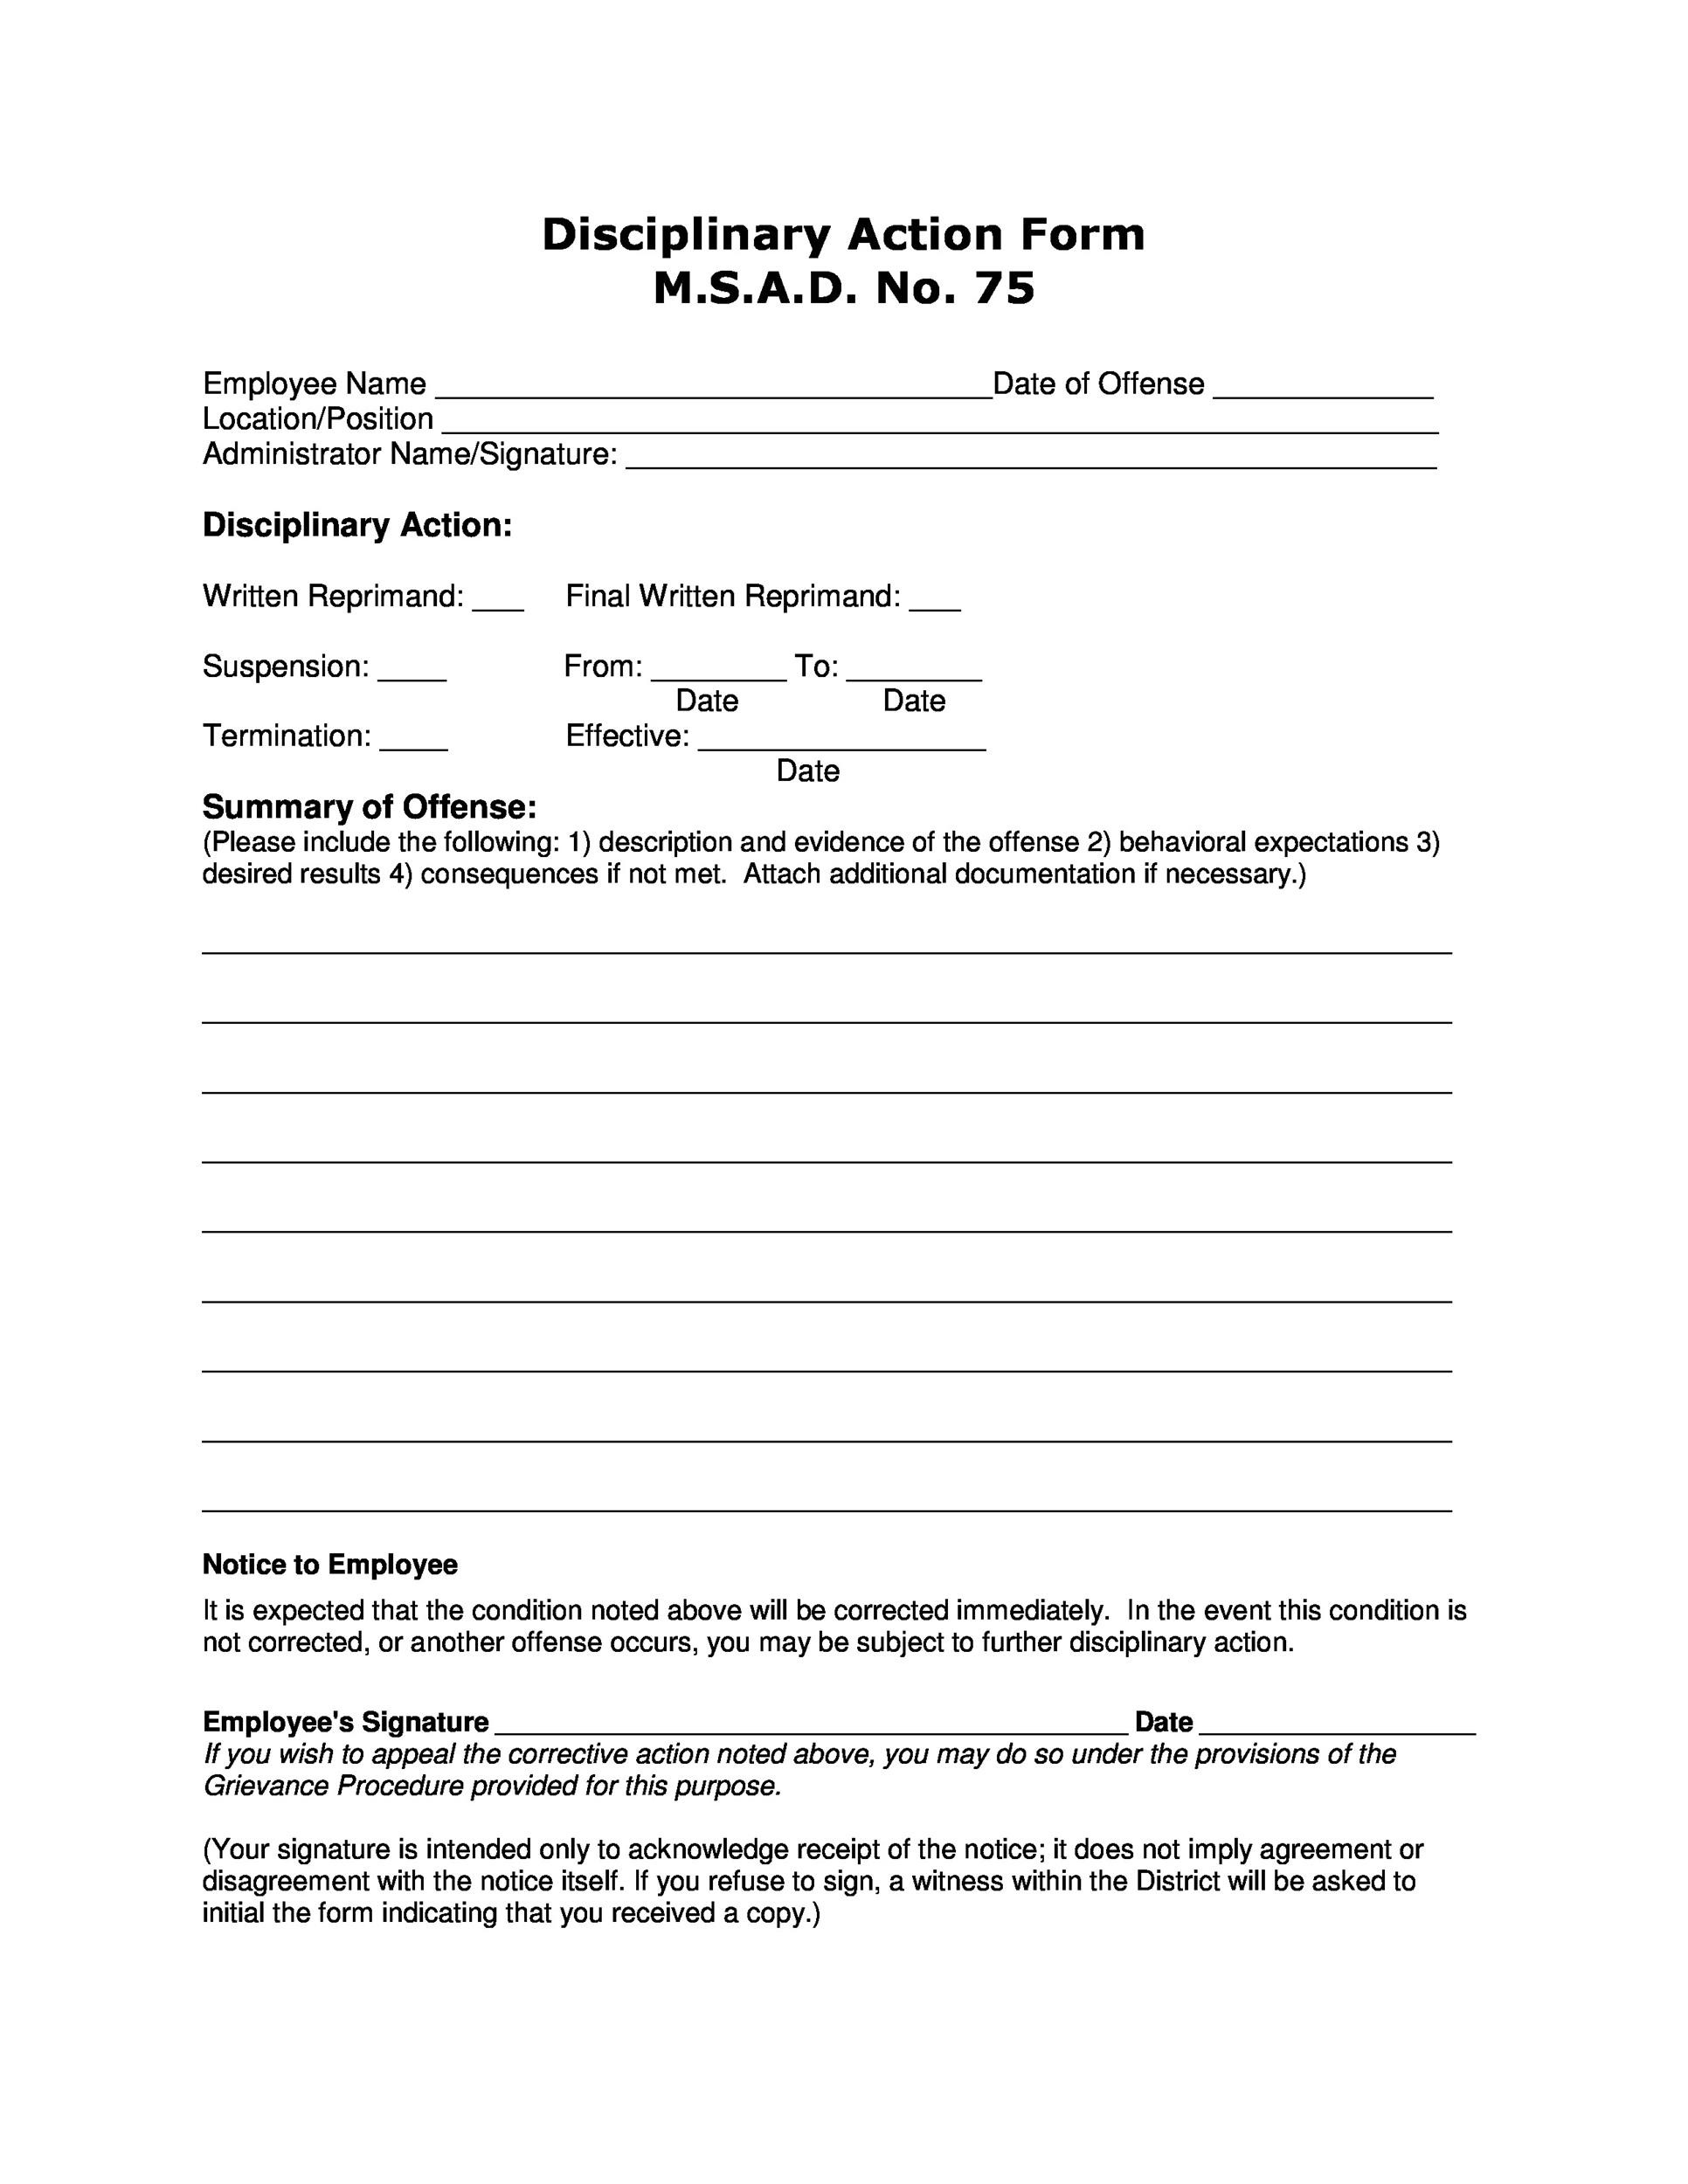 46-effective-employee-write-up-forms-disciplinary-action-forms